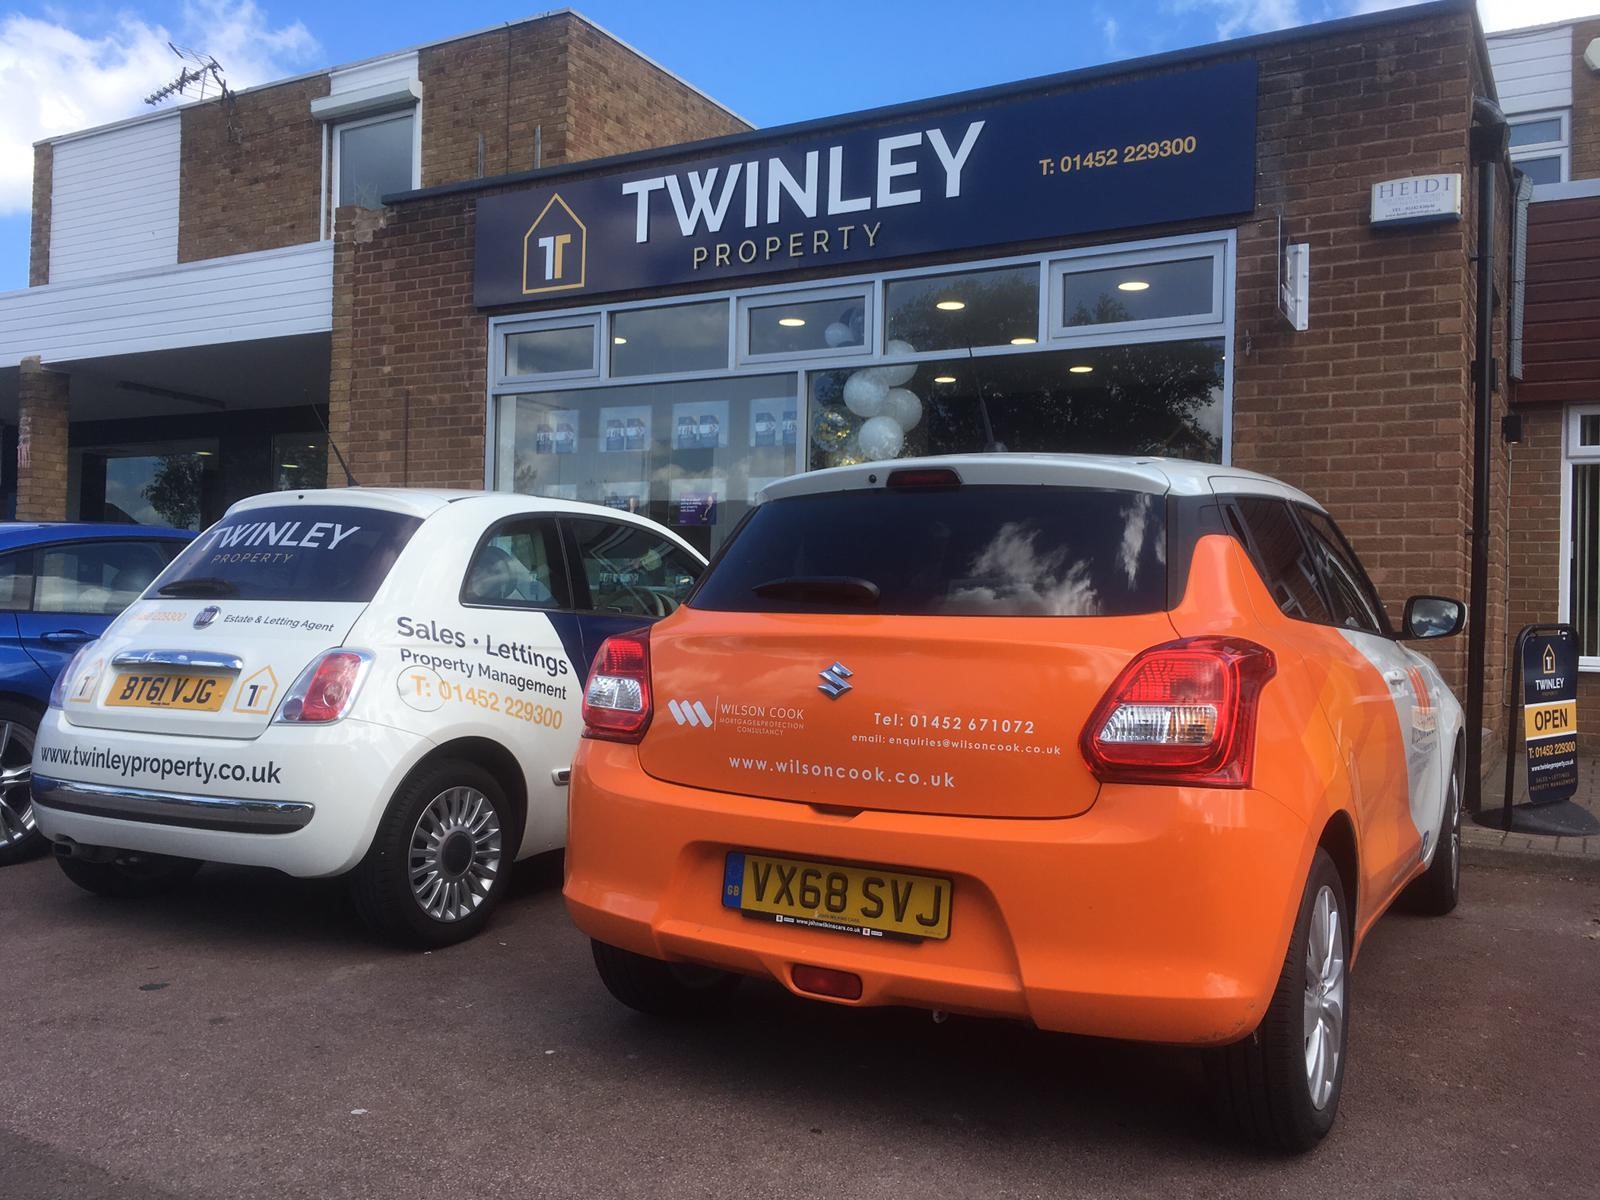 Twinley Property - Estate & Letting Agents